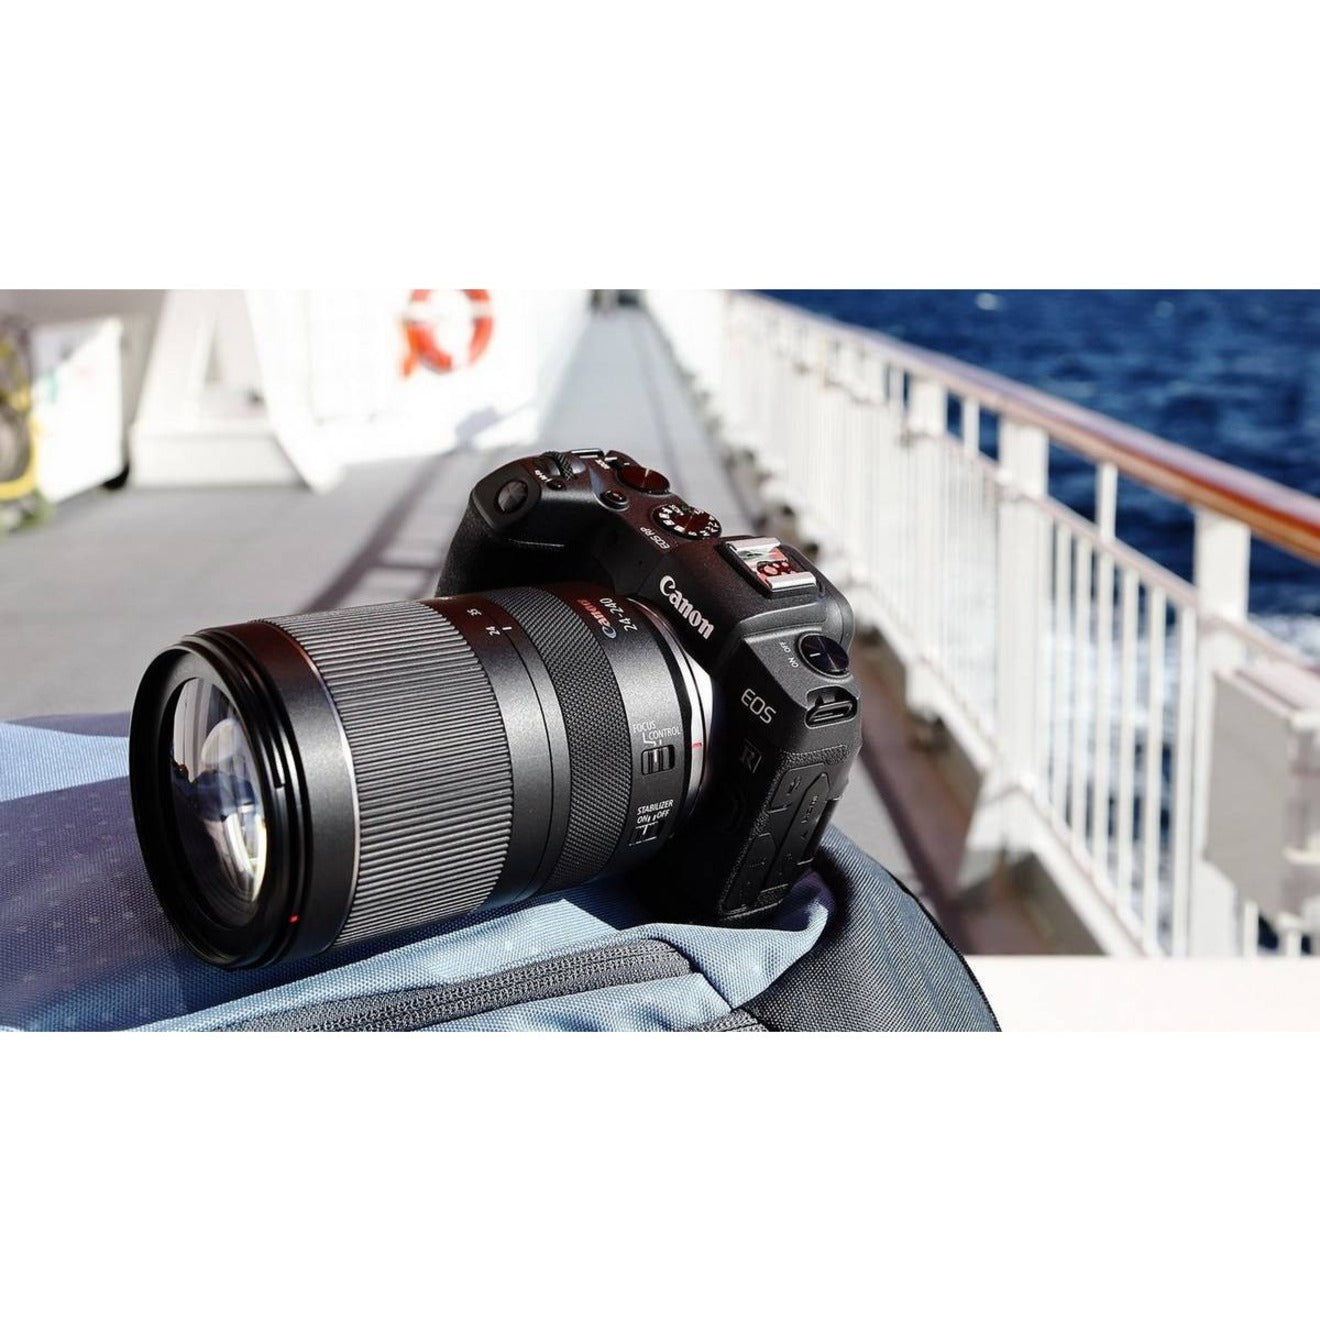 Canon - 24 mm to 240 mmf/6.3 - Standard Zoom Lens for Canon RF